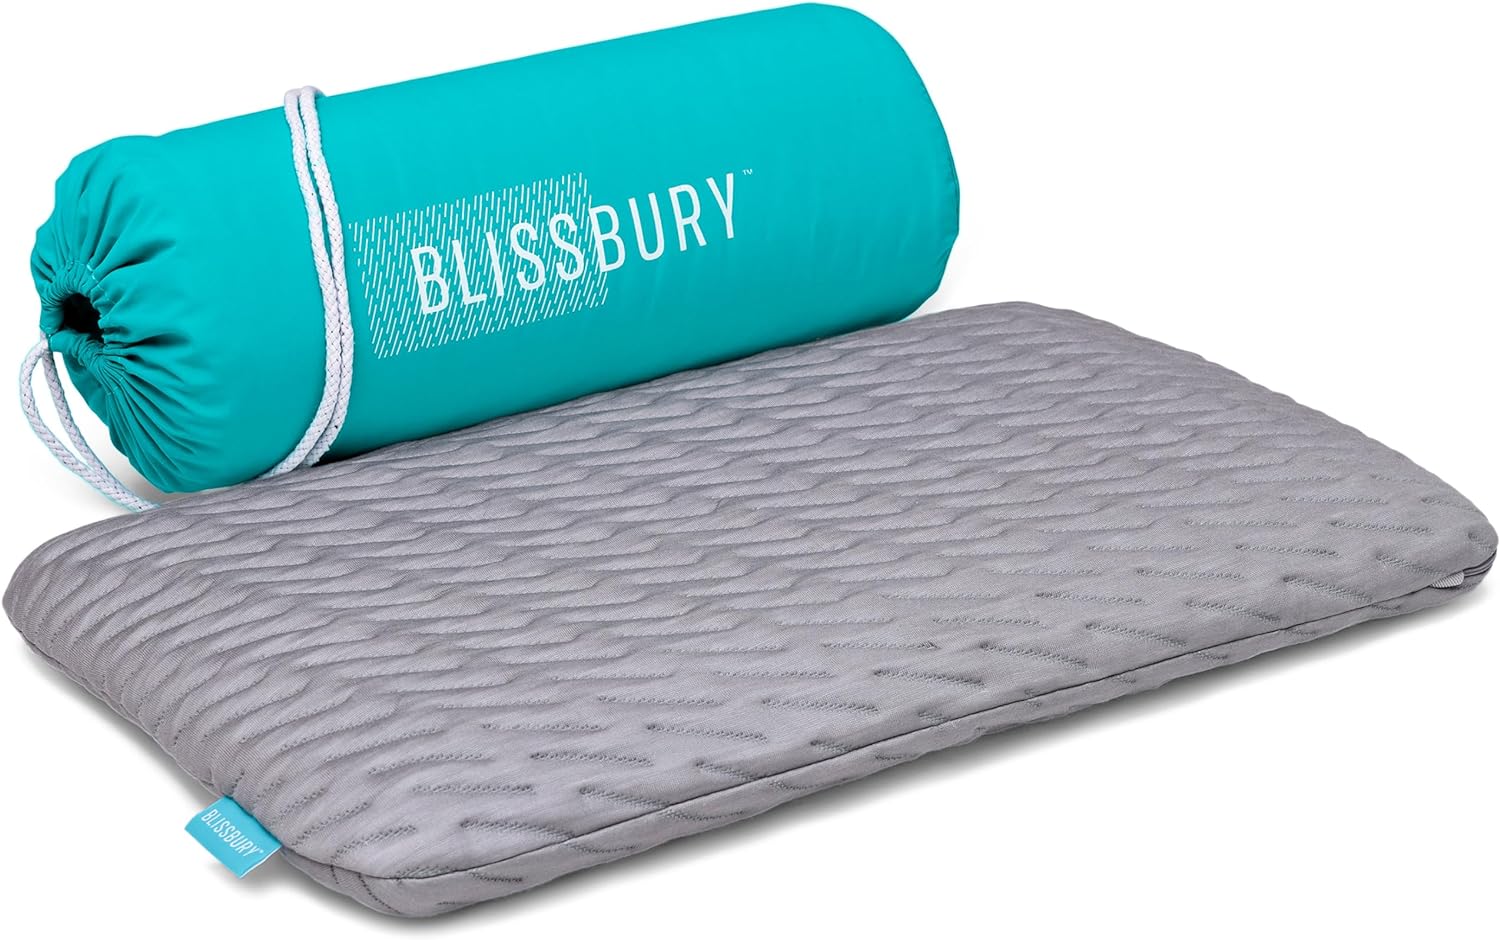 blissbury 26 inch ultra thin pillow for sleeping premium memory foam flat pillow for stomach sleeper for back stomach sl